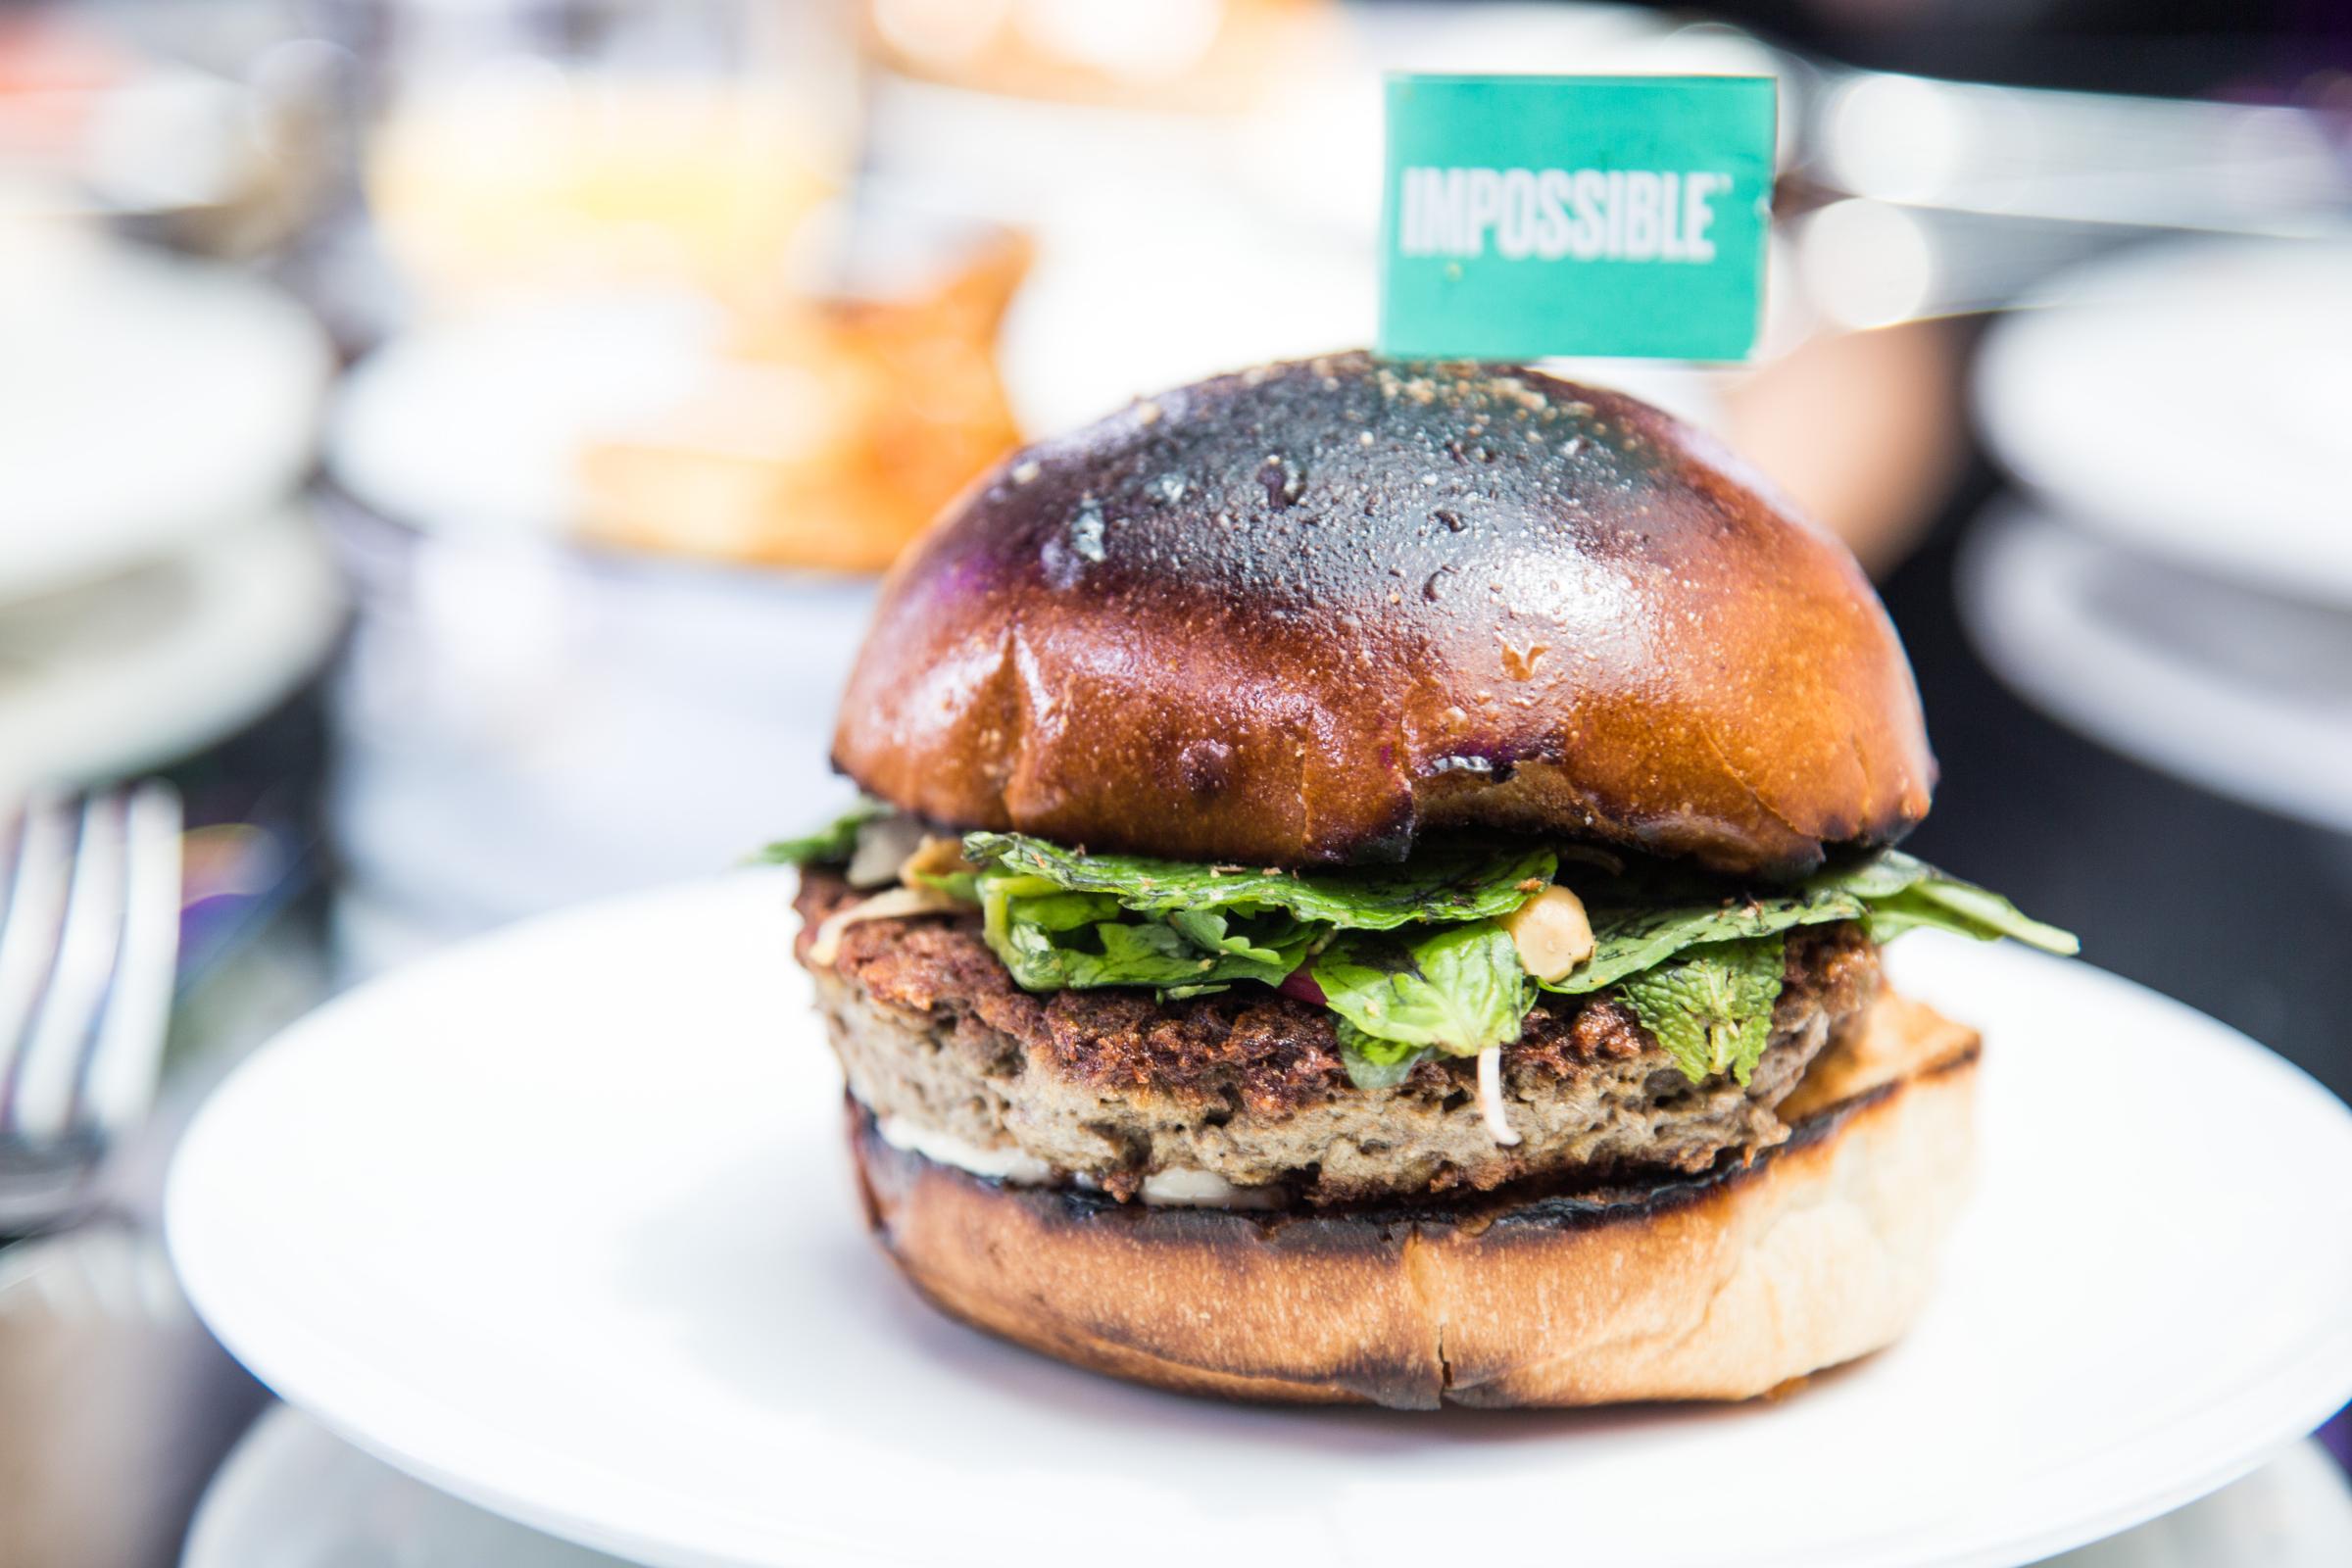 The Impossible Thai Burger by Uwe Opocensky, chef of Beef and Liberty. / Aria Hangyu Chen for TIME